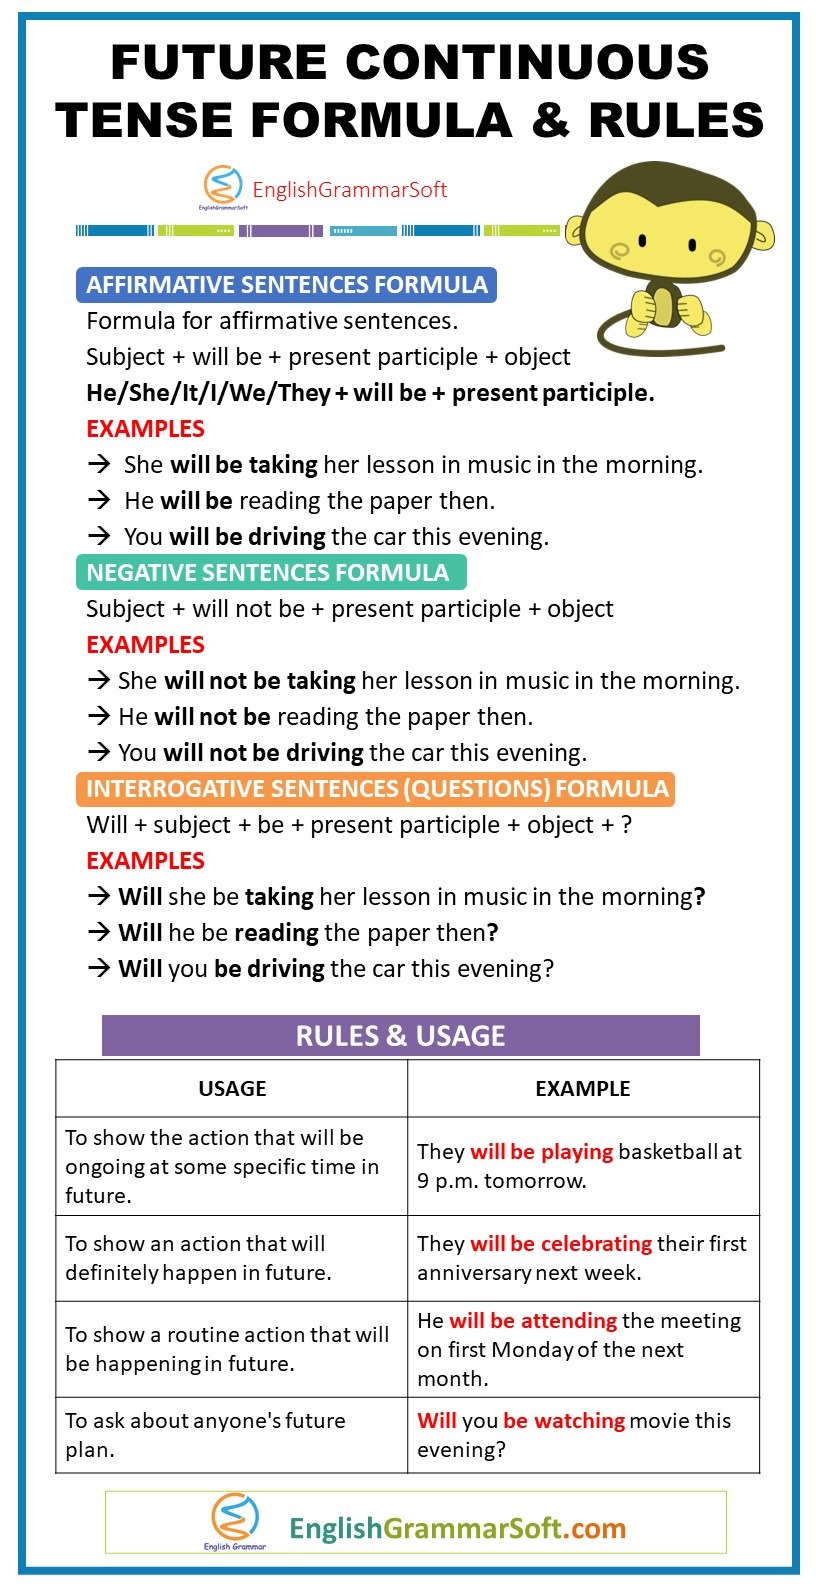 future continuous tense formula and rules